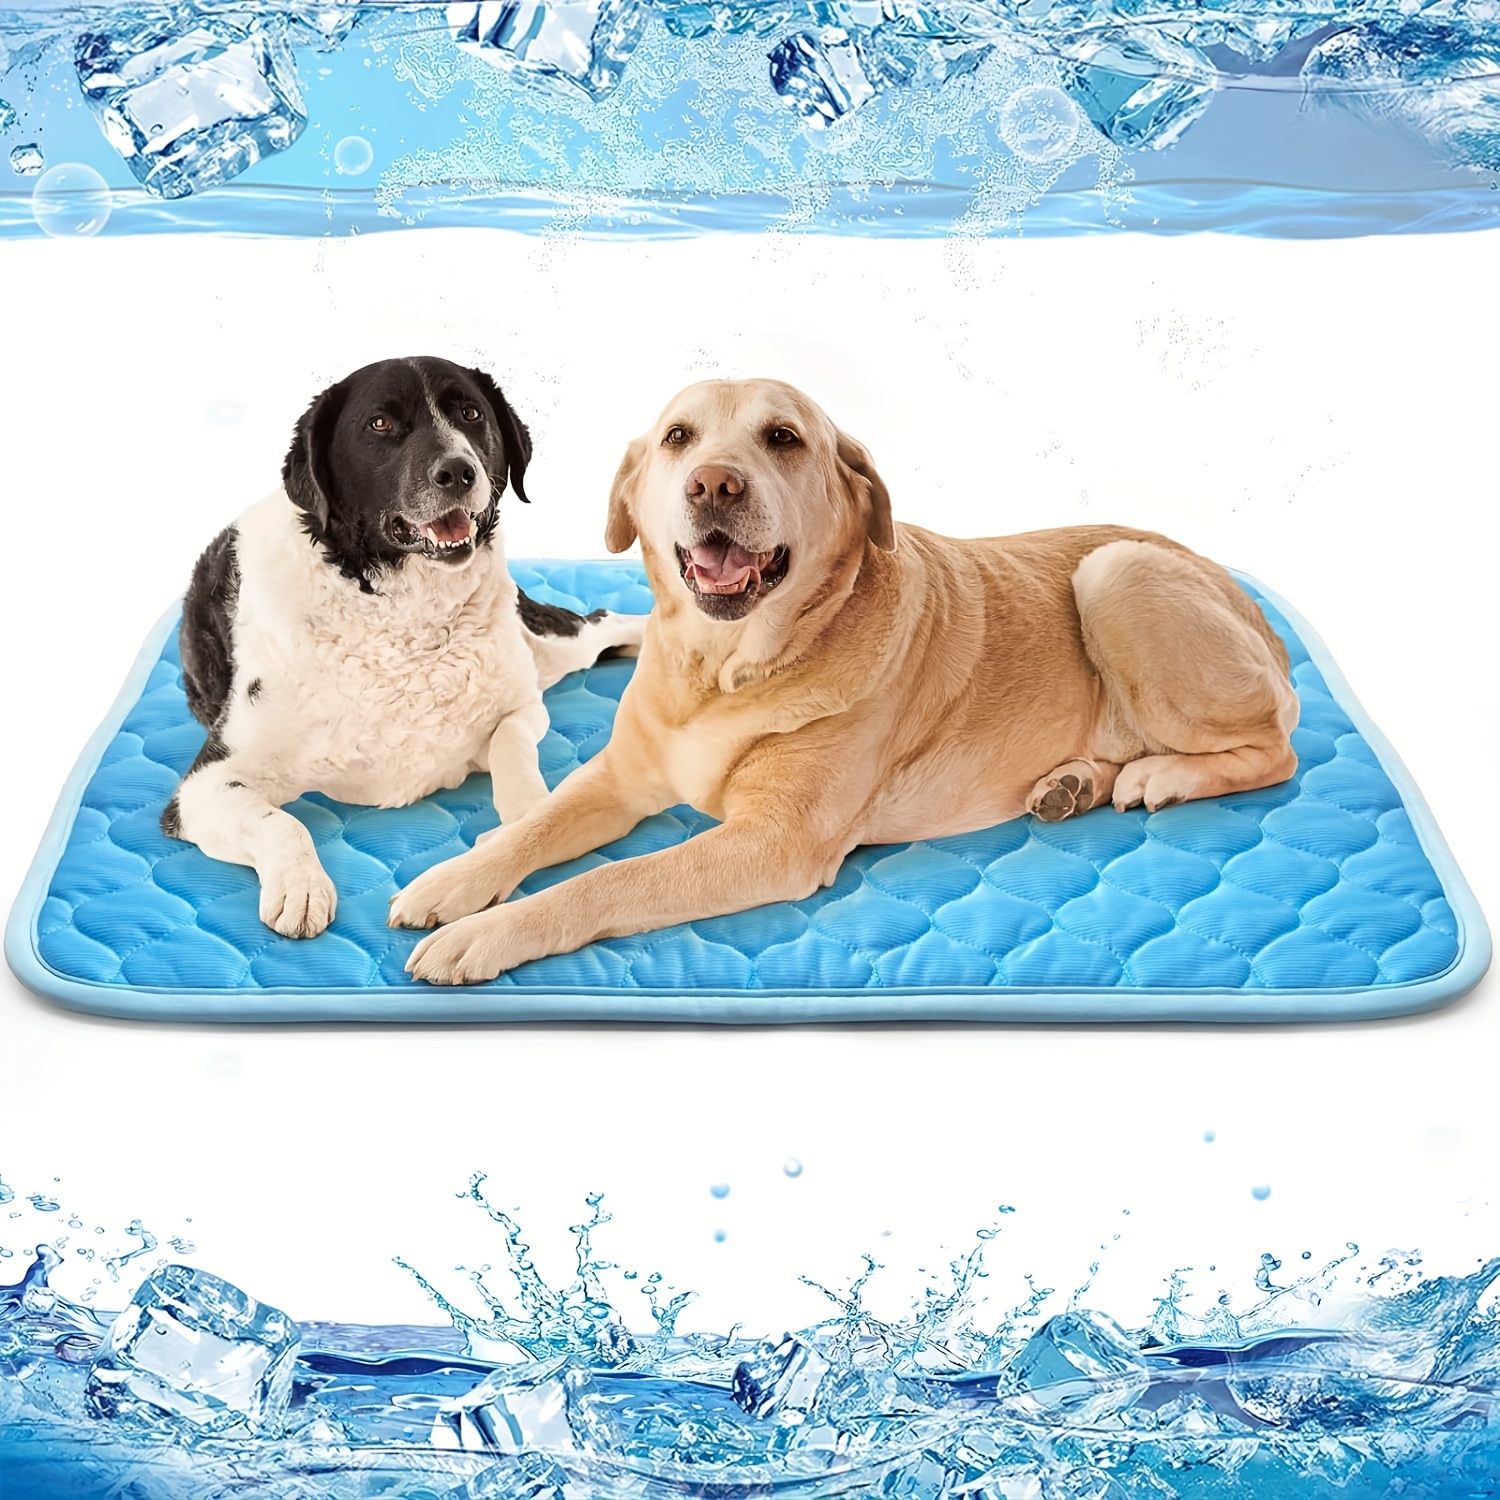 

all-size Snuggle" Ewoid Cooling Dog Mat - Ice Silk Self-cooling Pad For Pets, Washable Summer Chill Bed For Small To Large Dogs & Cats, Rectangular Plaid Design